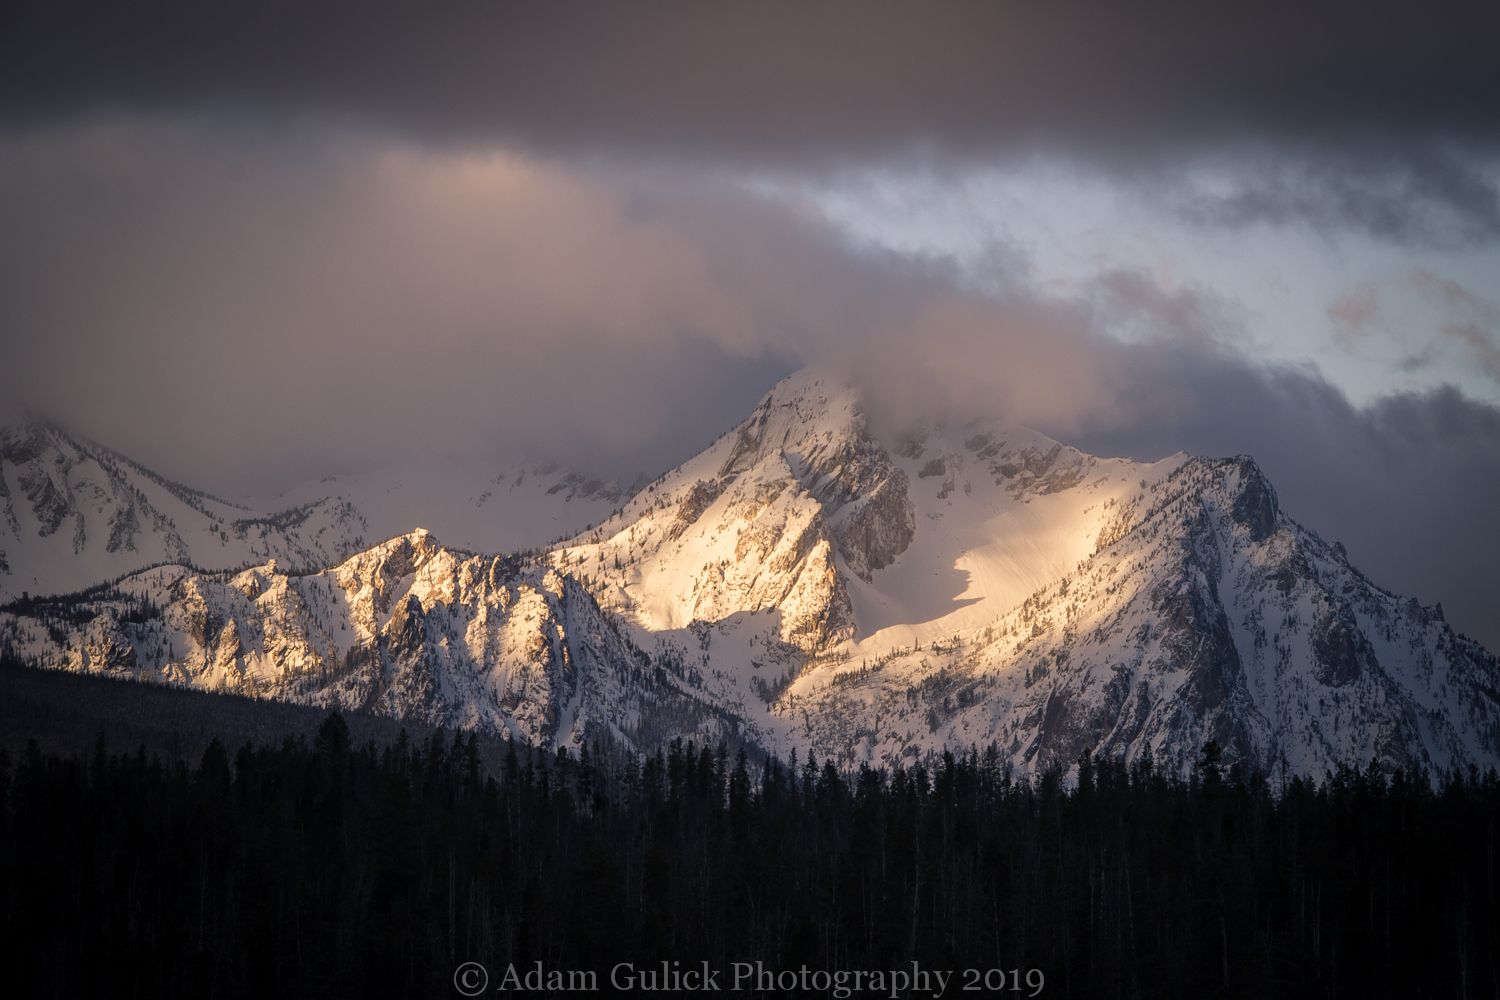 Clouds coming over a snowy mountain Stanley, ID | Stanley Chambers